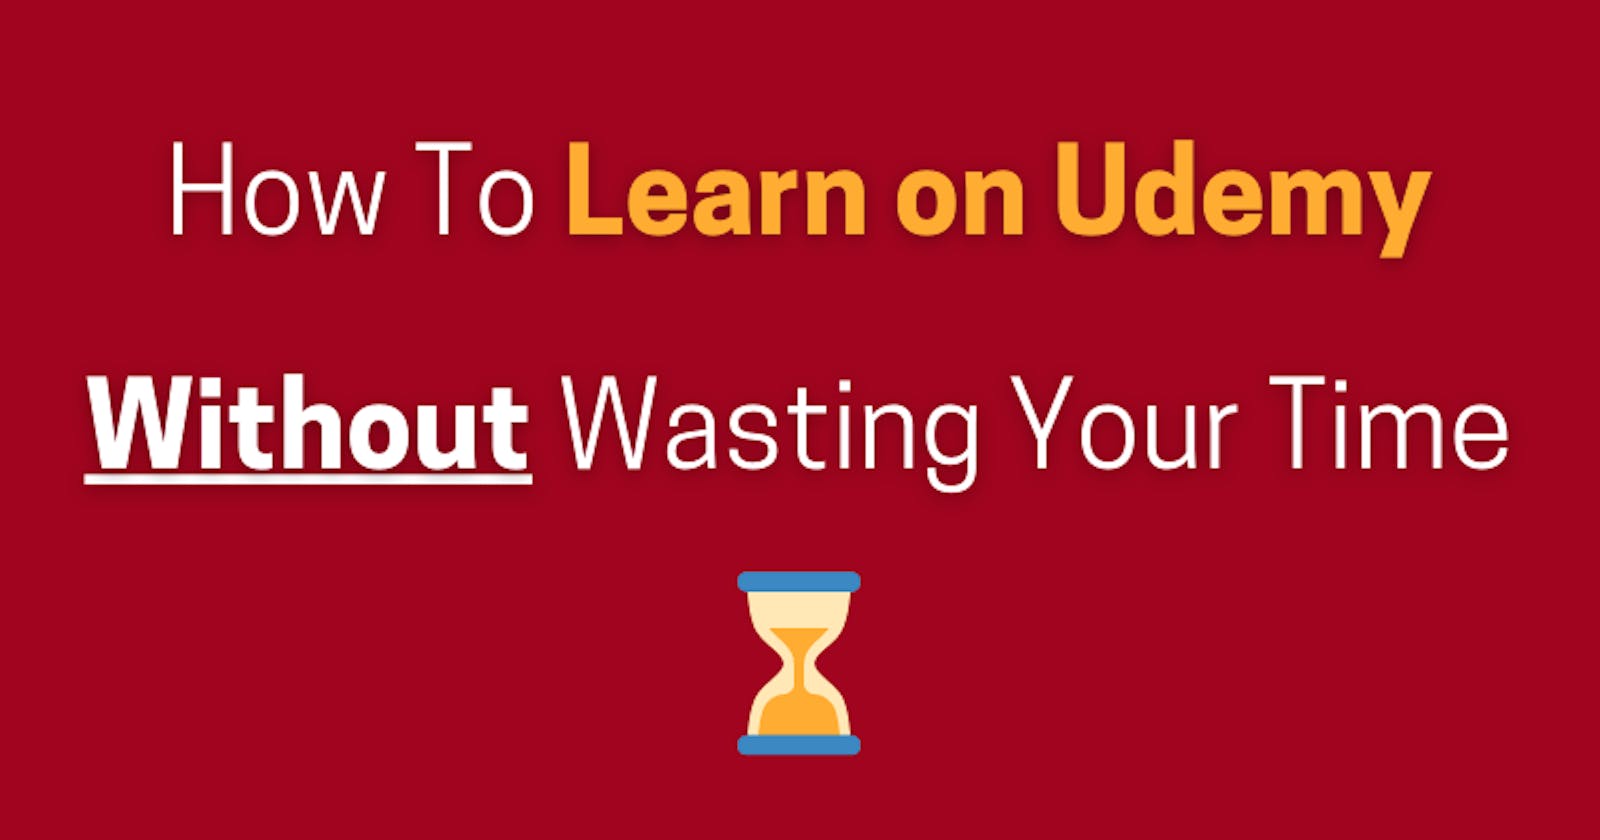 How To Learn on Udemy Without Wasting Your Time